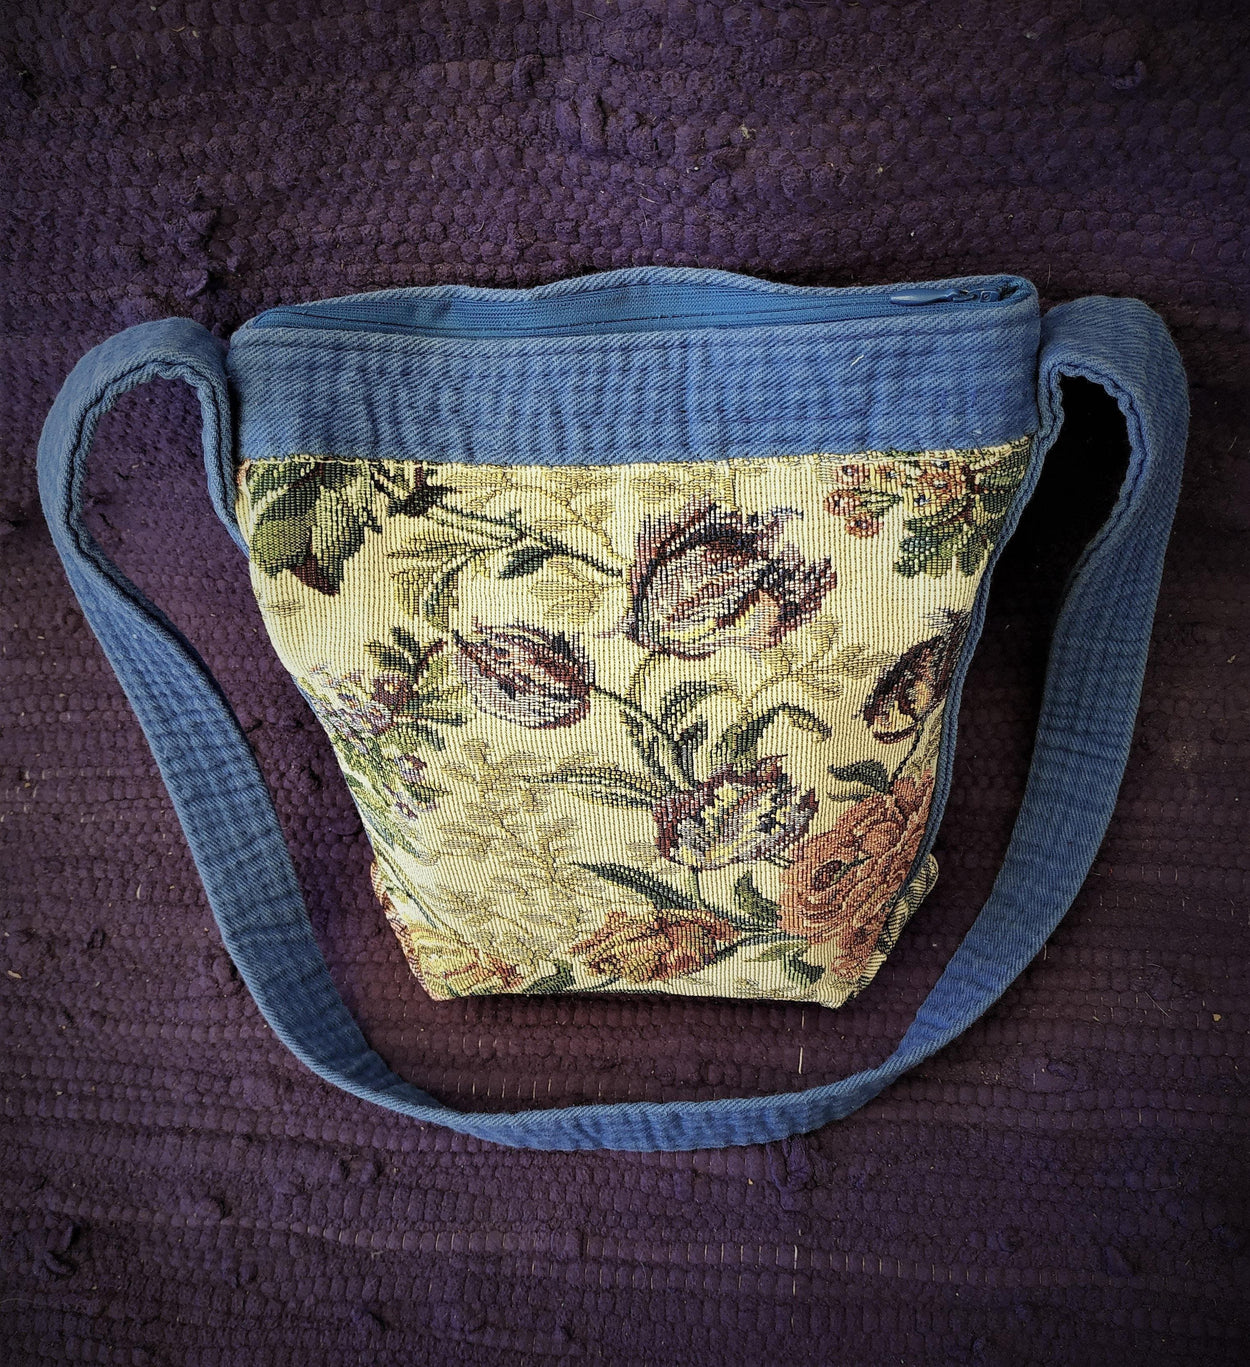 Bags made of tapestry with a long blue-gray handle and a zipper - GLEZANT designer goods store. 